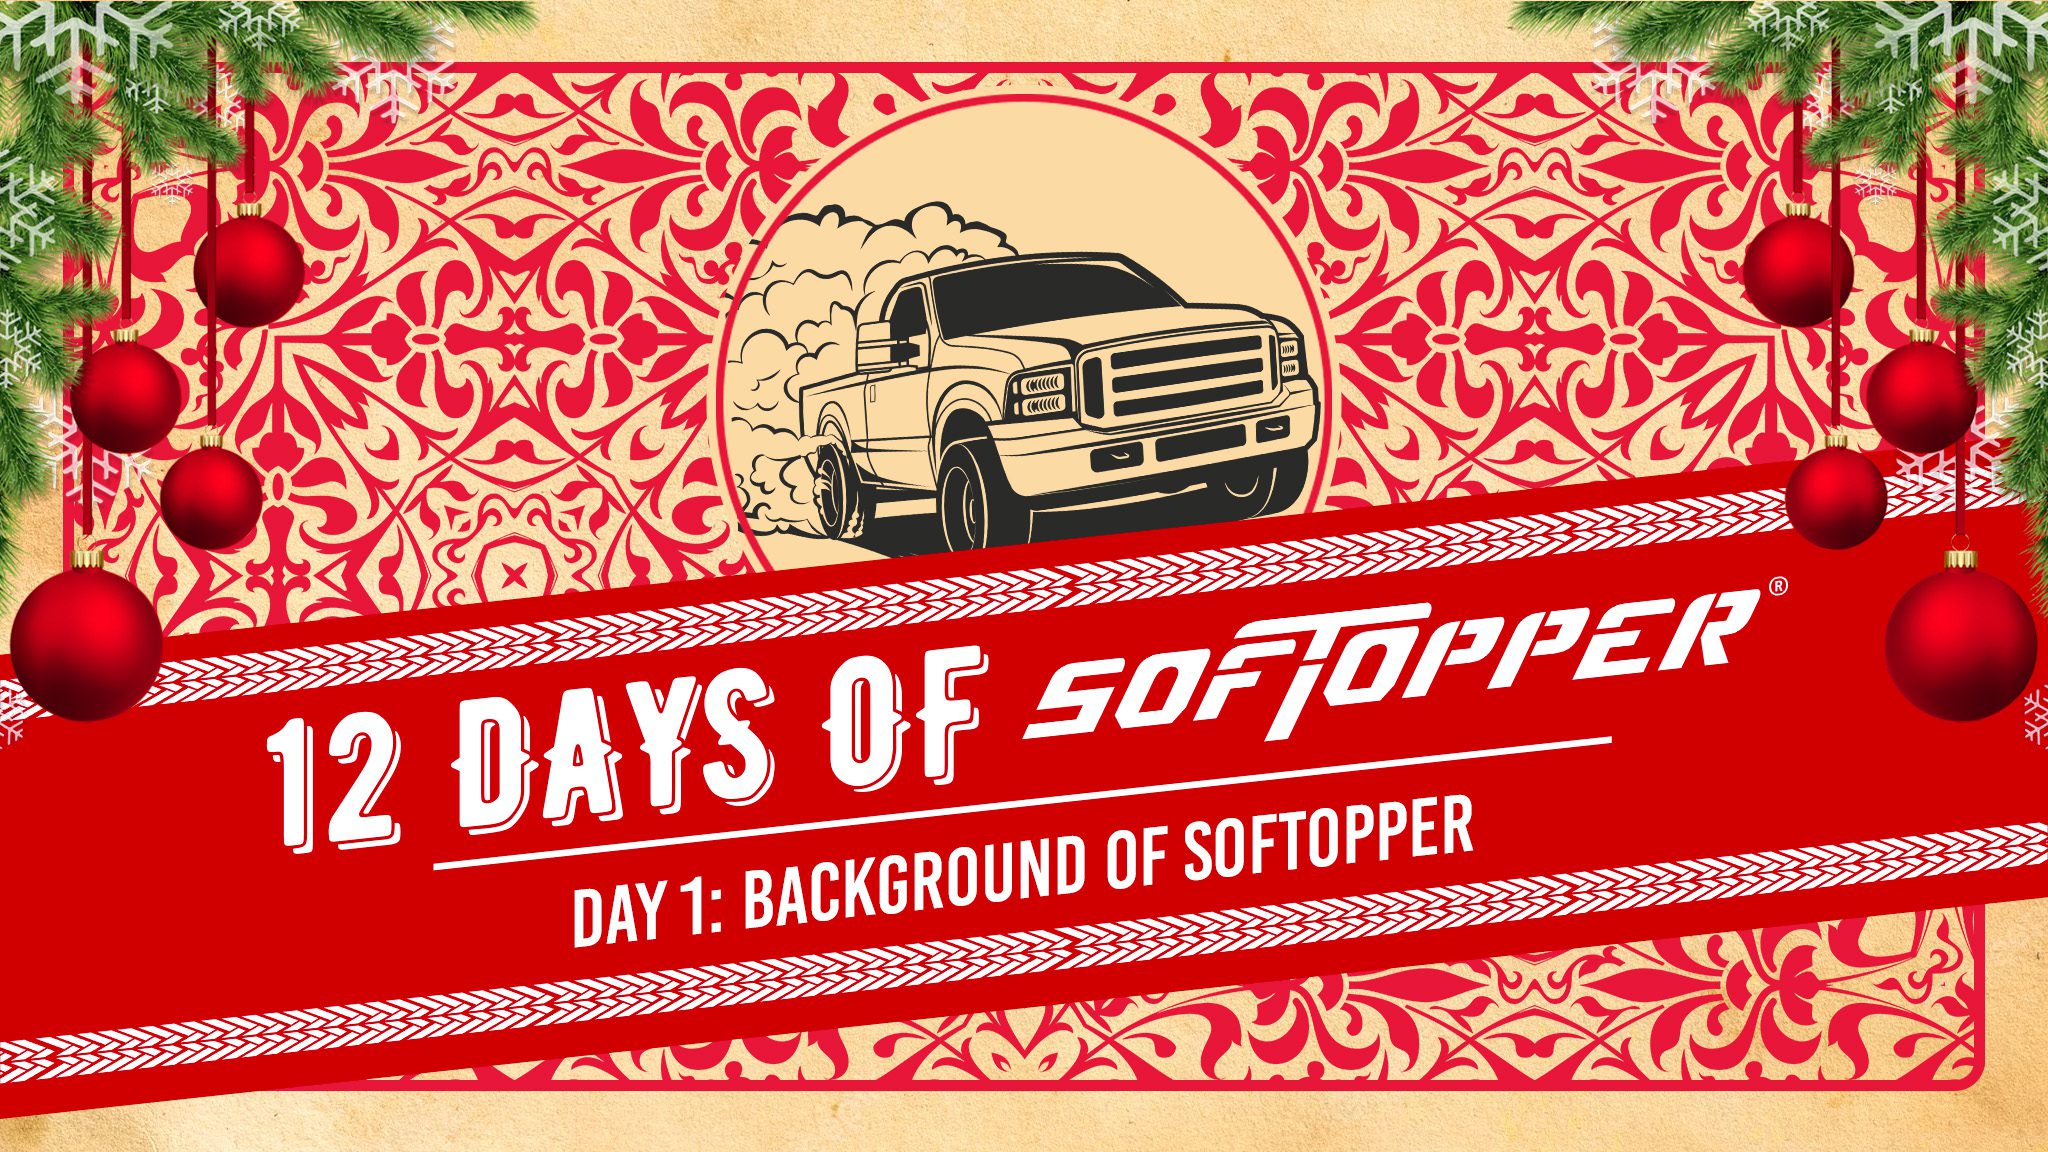 Background of Softopper